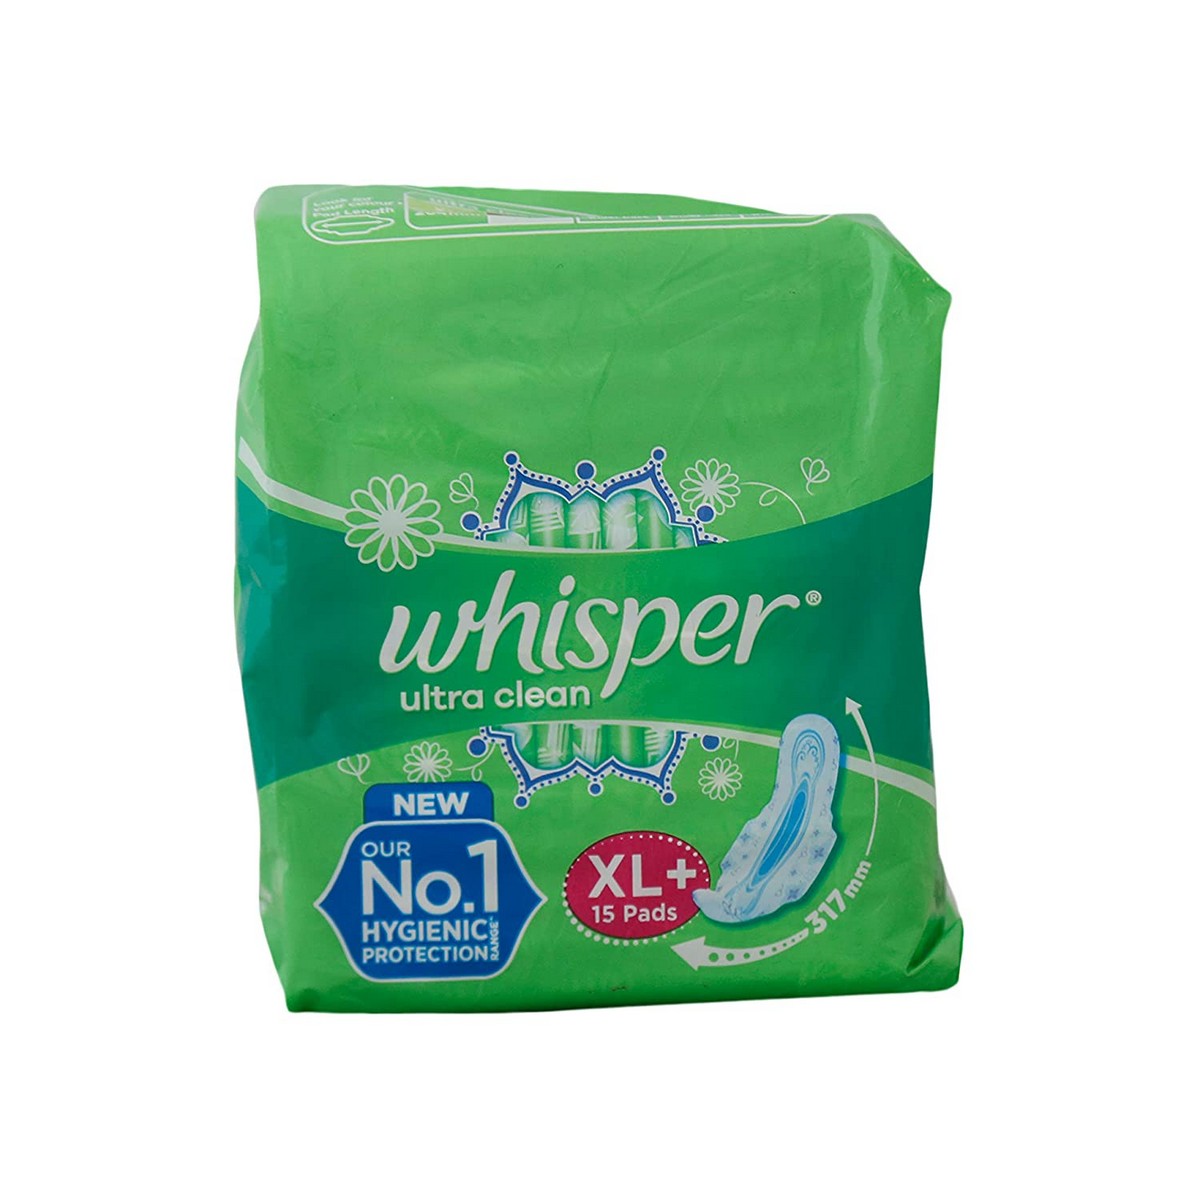 New Whisper Ultra Clean Sanitary Pads for Women, XL+ 50 Napkins US